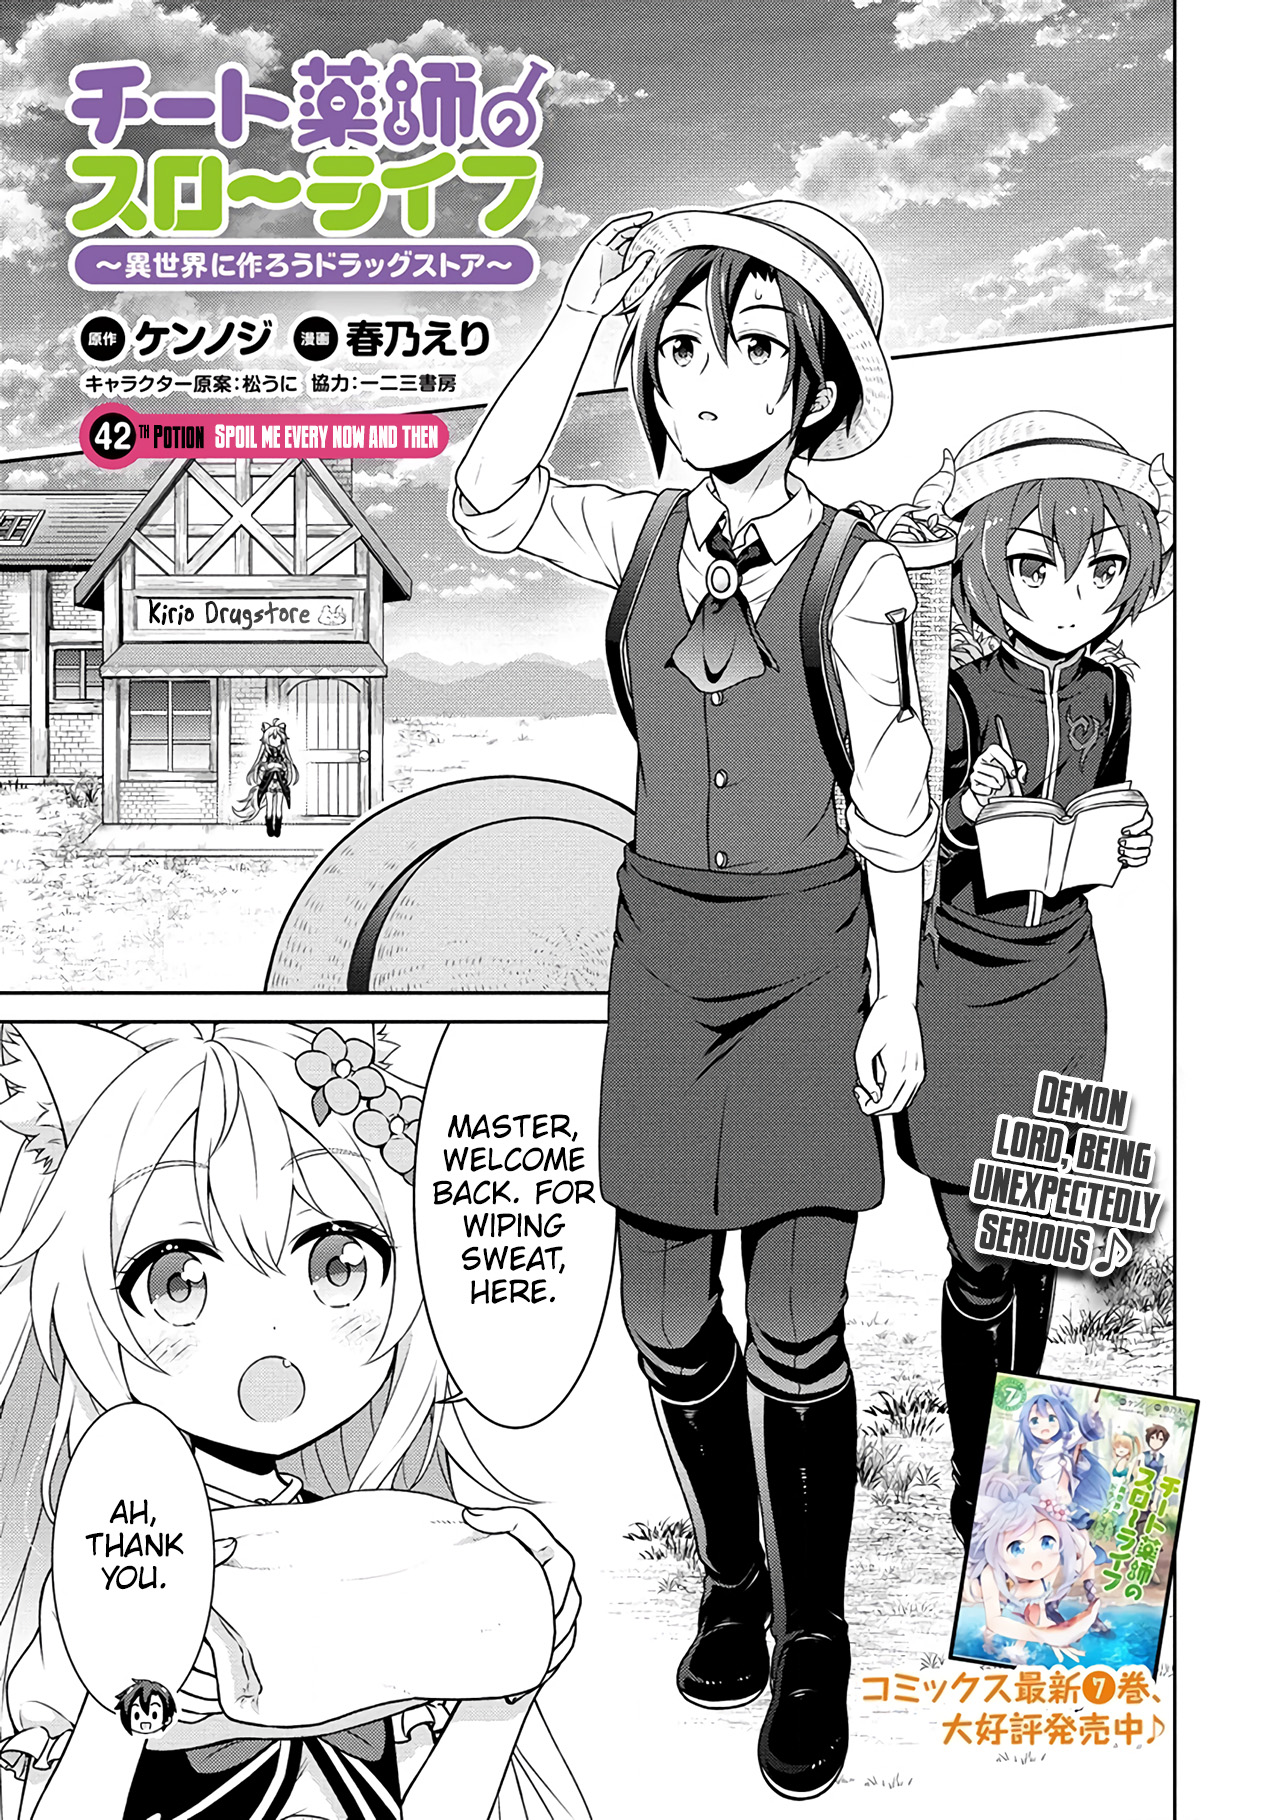 Cheat Kusushi No Slow Life: Isekai Ni Tsukurou Drugstore Vol.8 Chapter 42: Spoil Me Every Now And Then - Picture 2